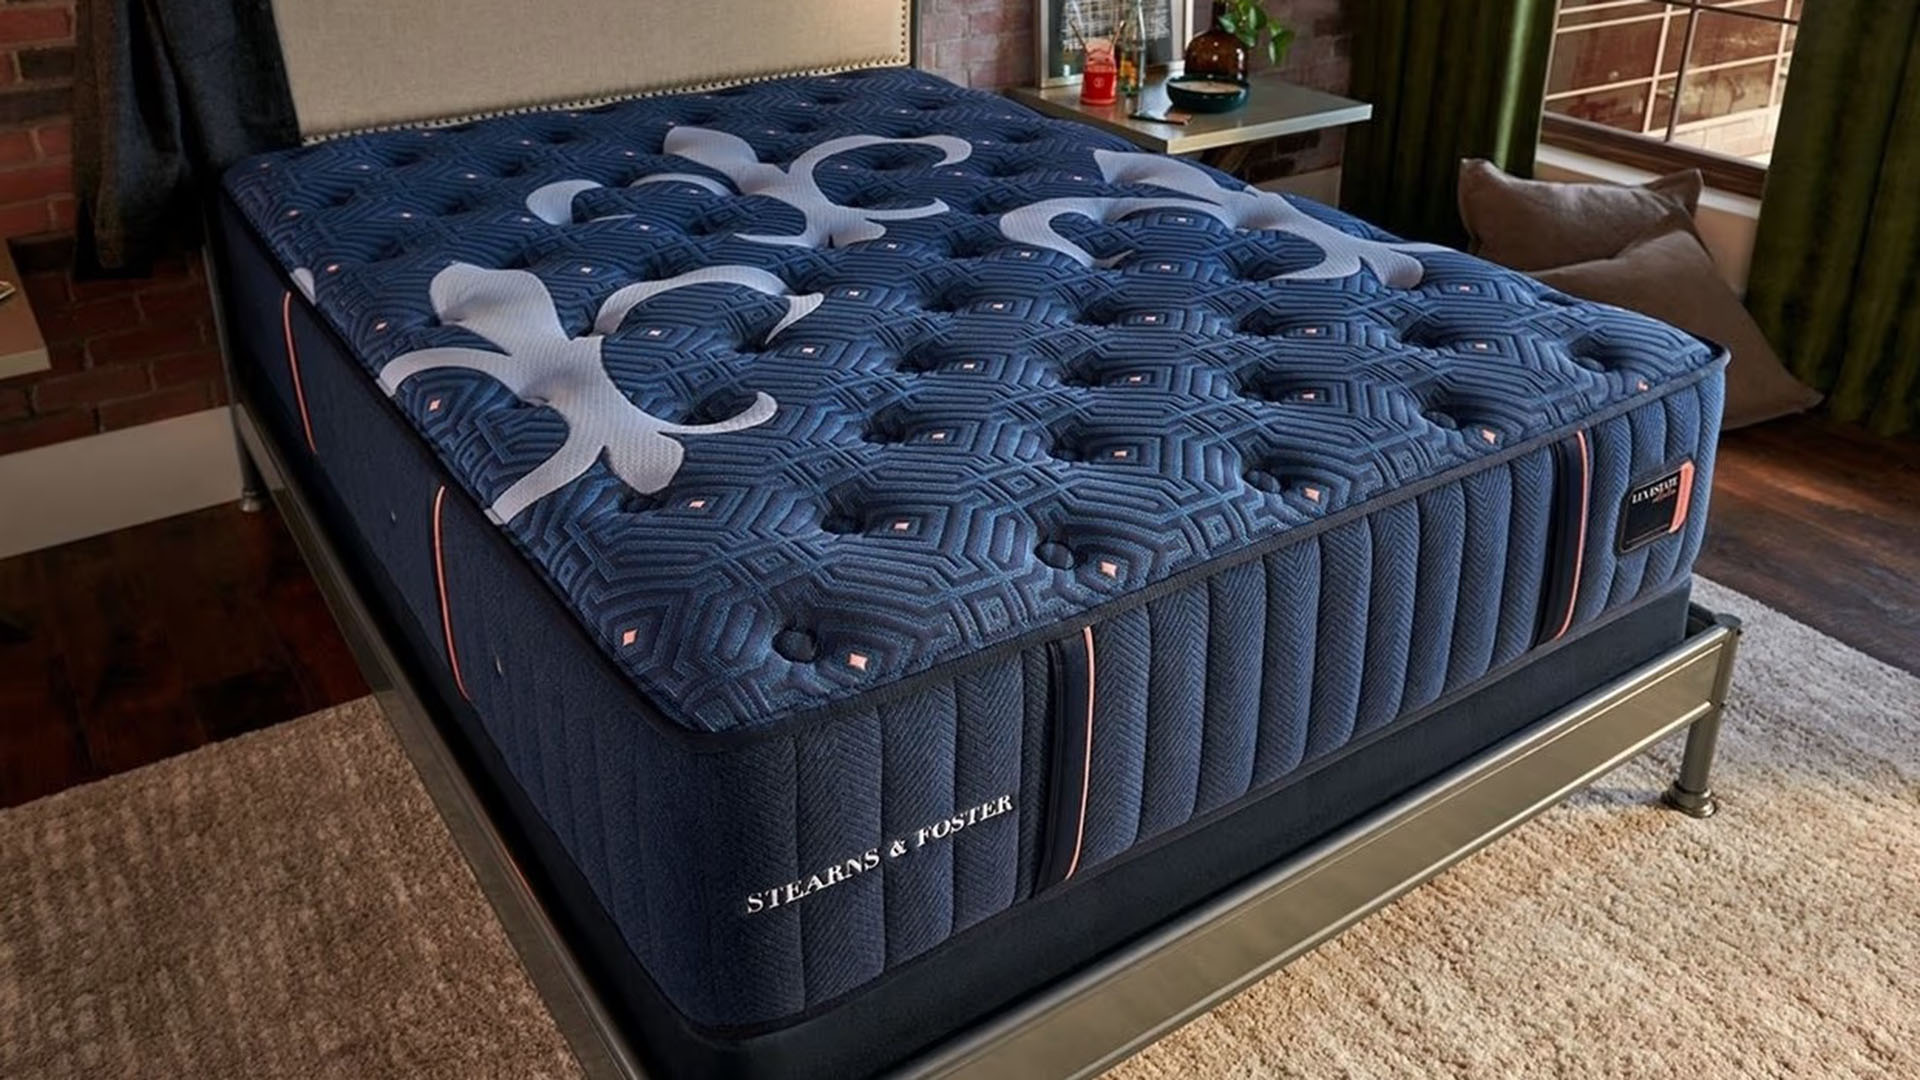 Stearns & Foster's mattresses in Apopka, FL offer unbeatable prices and luxurious materials.